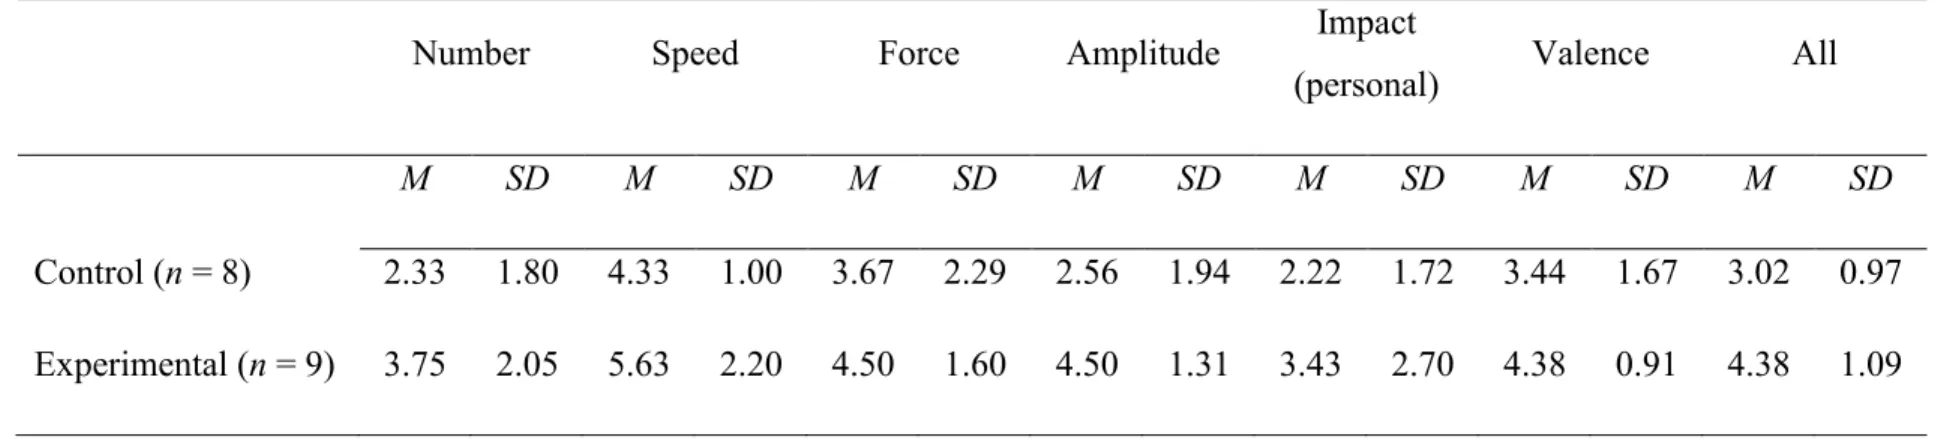 Table 1.1. Means and standard deviations for individual items of Perception of change scale accordingly to experimental condition in  Study 1 (N = 17)